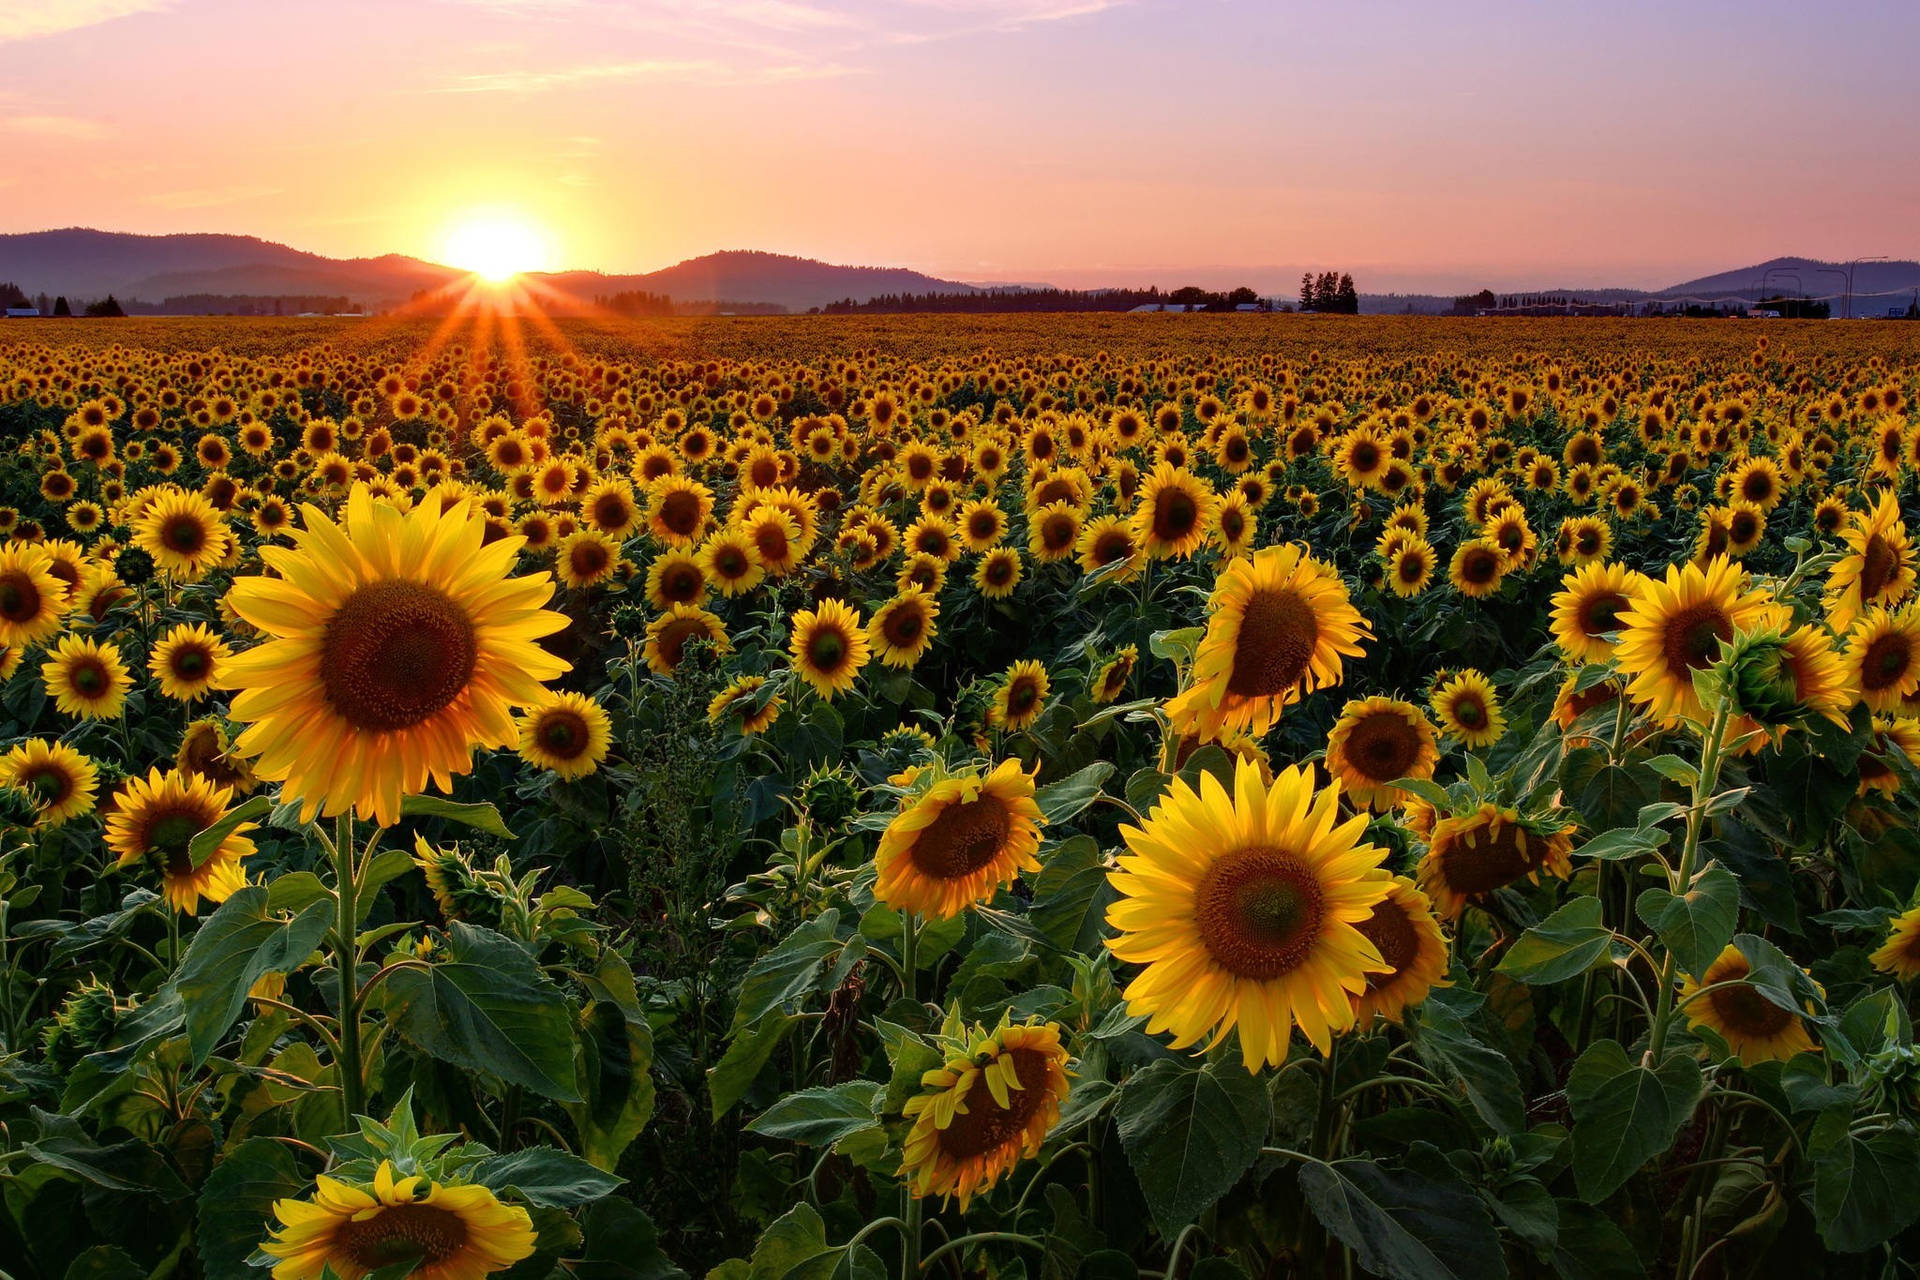 "A Field of Sunflowers Blooms in the Sunshine" Wallpaper